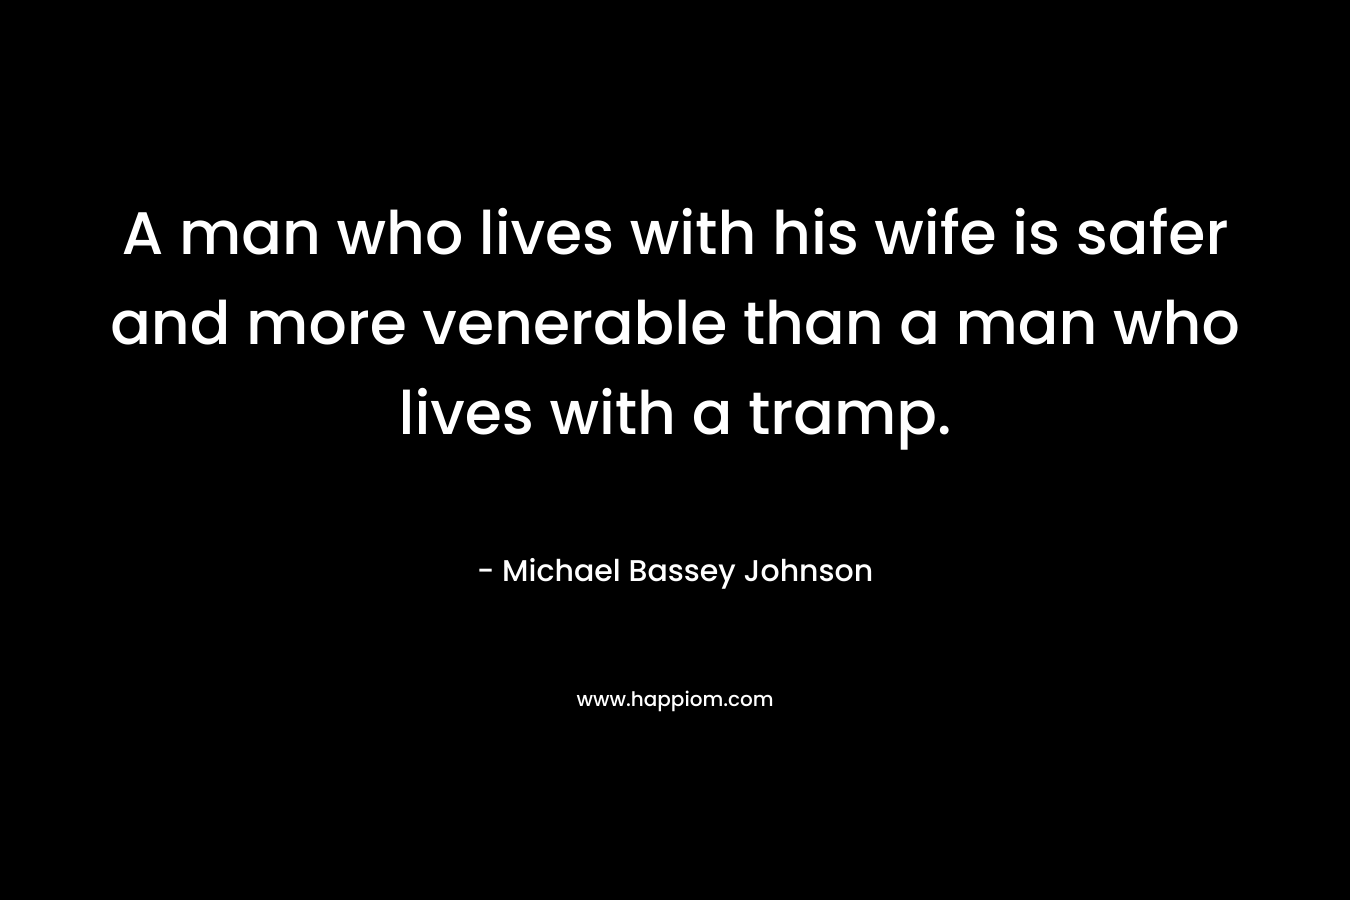 A man who lives with his wife is safer and more venerable than a man who lives with a tramp.